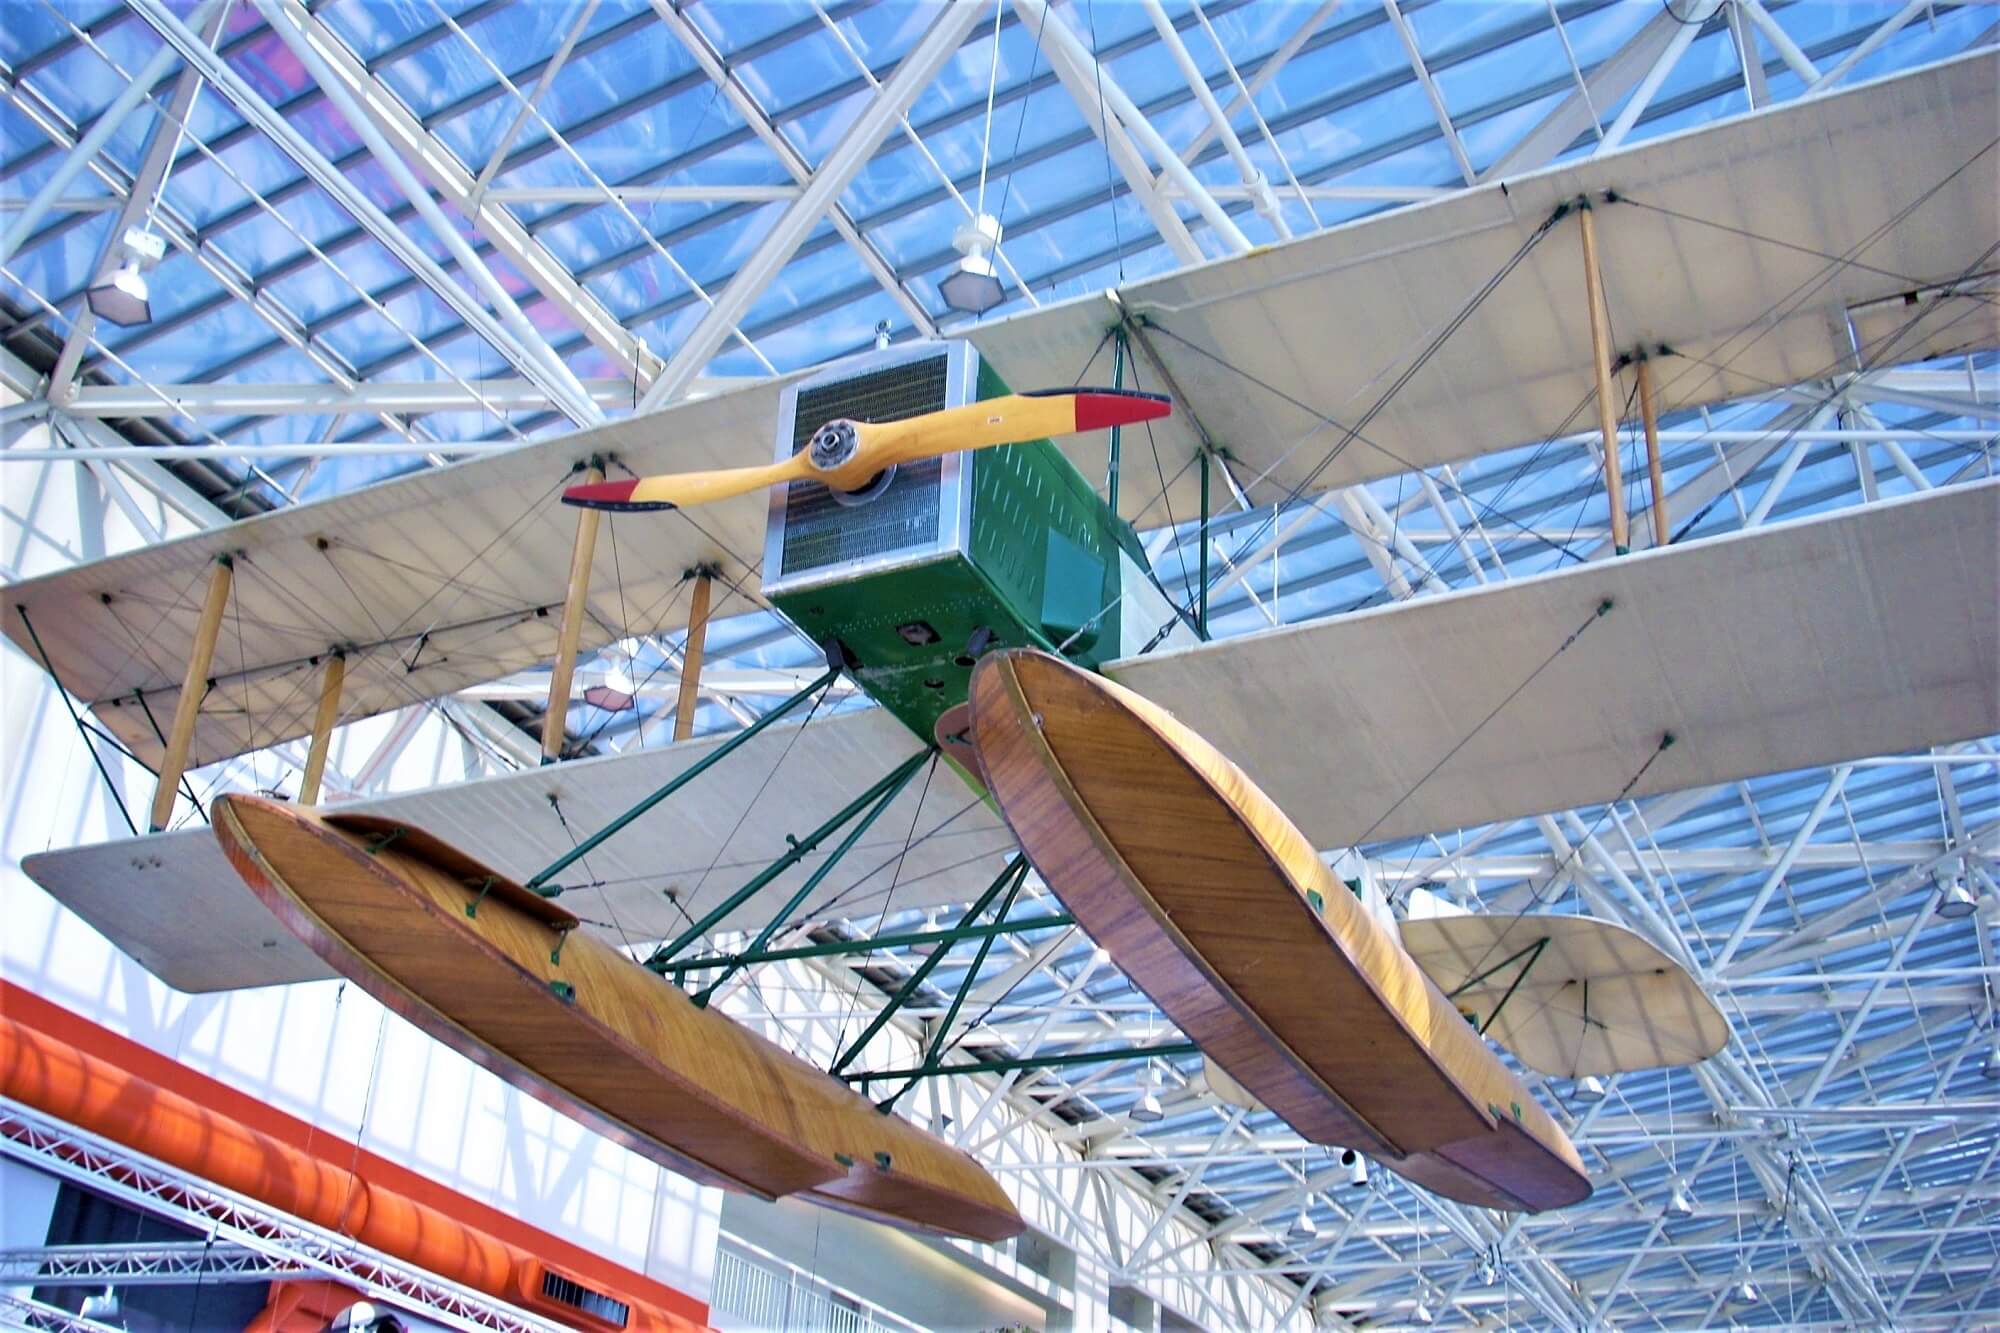 Replica of Boeing B&W Seaplane at the Museum of Flight